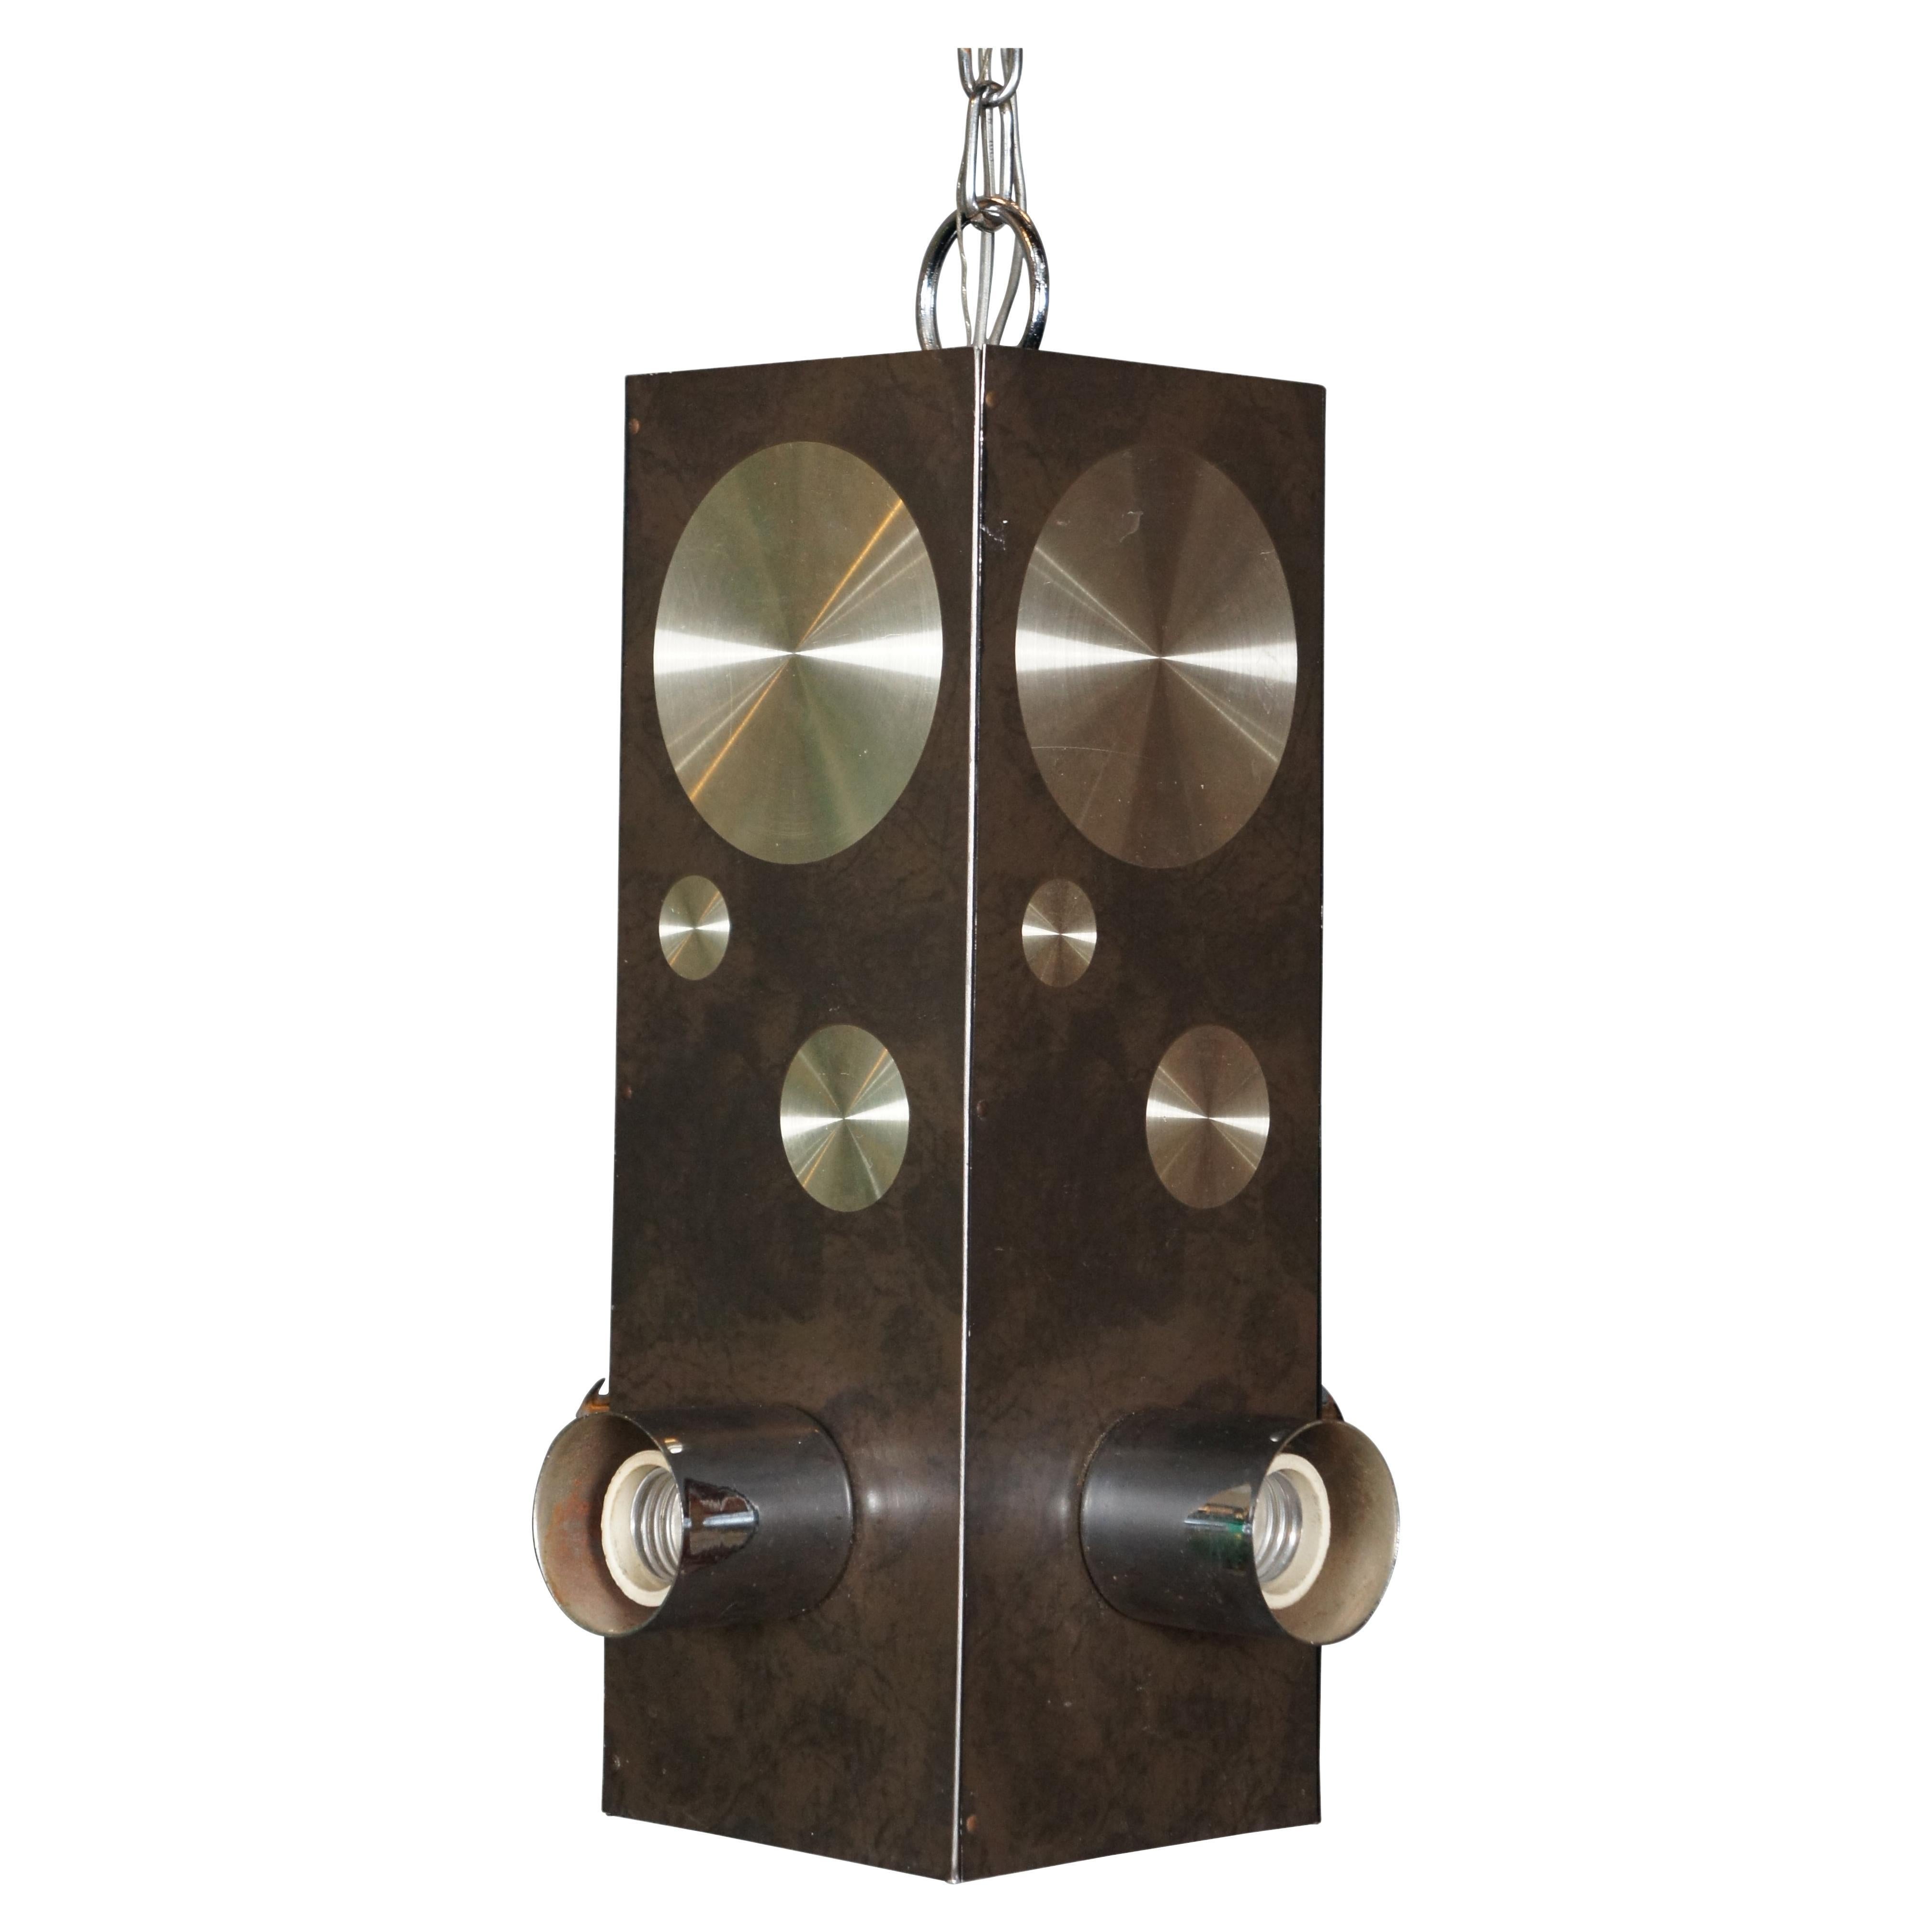 Rare mid century / retro / atomic / modernist stoplight style pendant light with a brown painted metal rectangular form accented with silver discs and four chrome sockets.